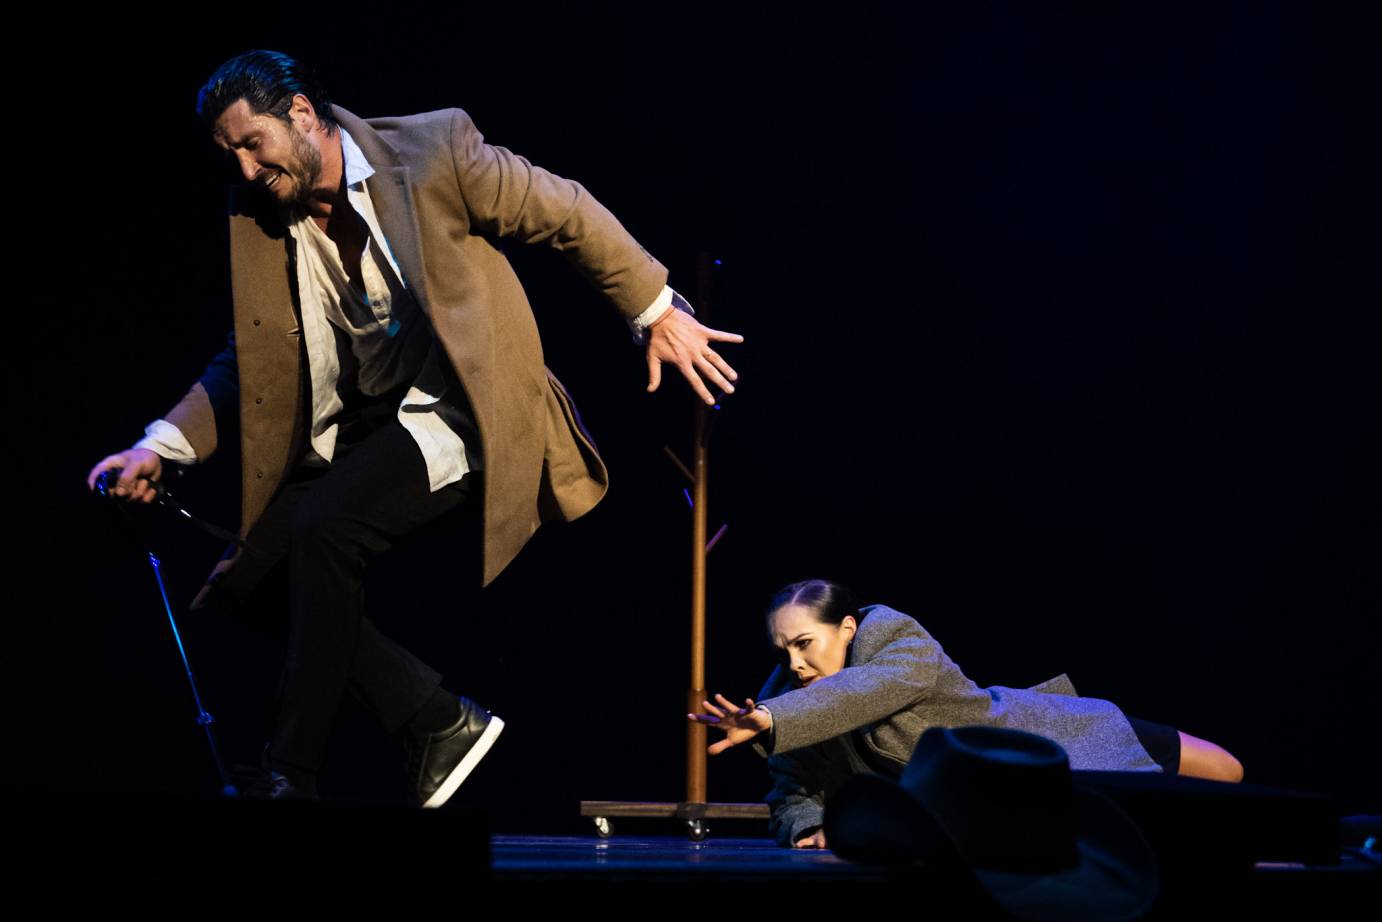 In a suit jacket, Maks walks away as Alexis holds onto his leg to stop him